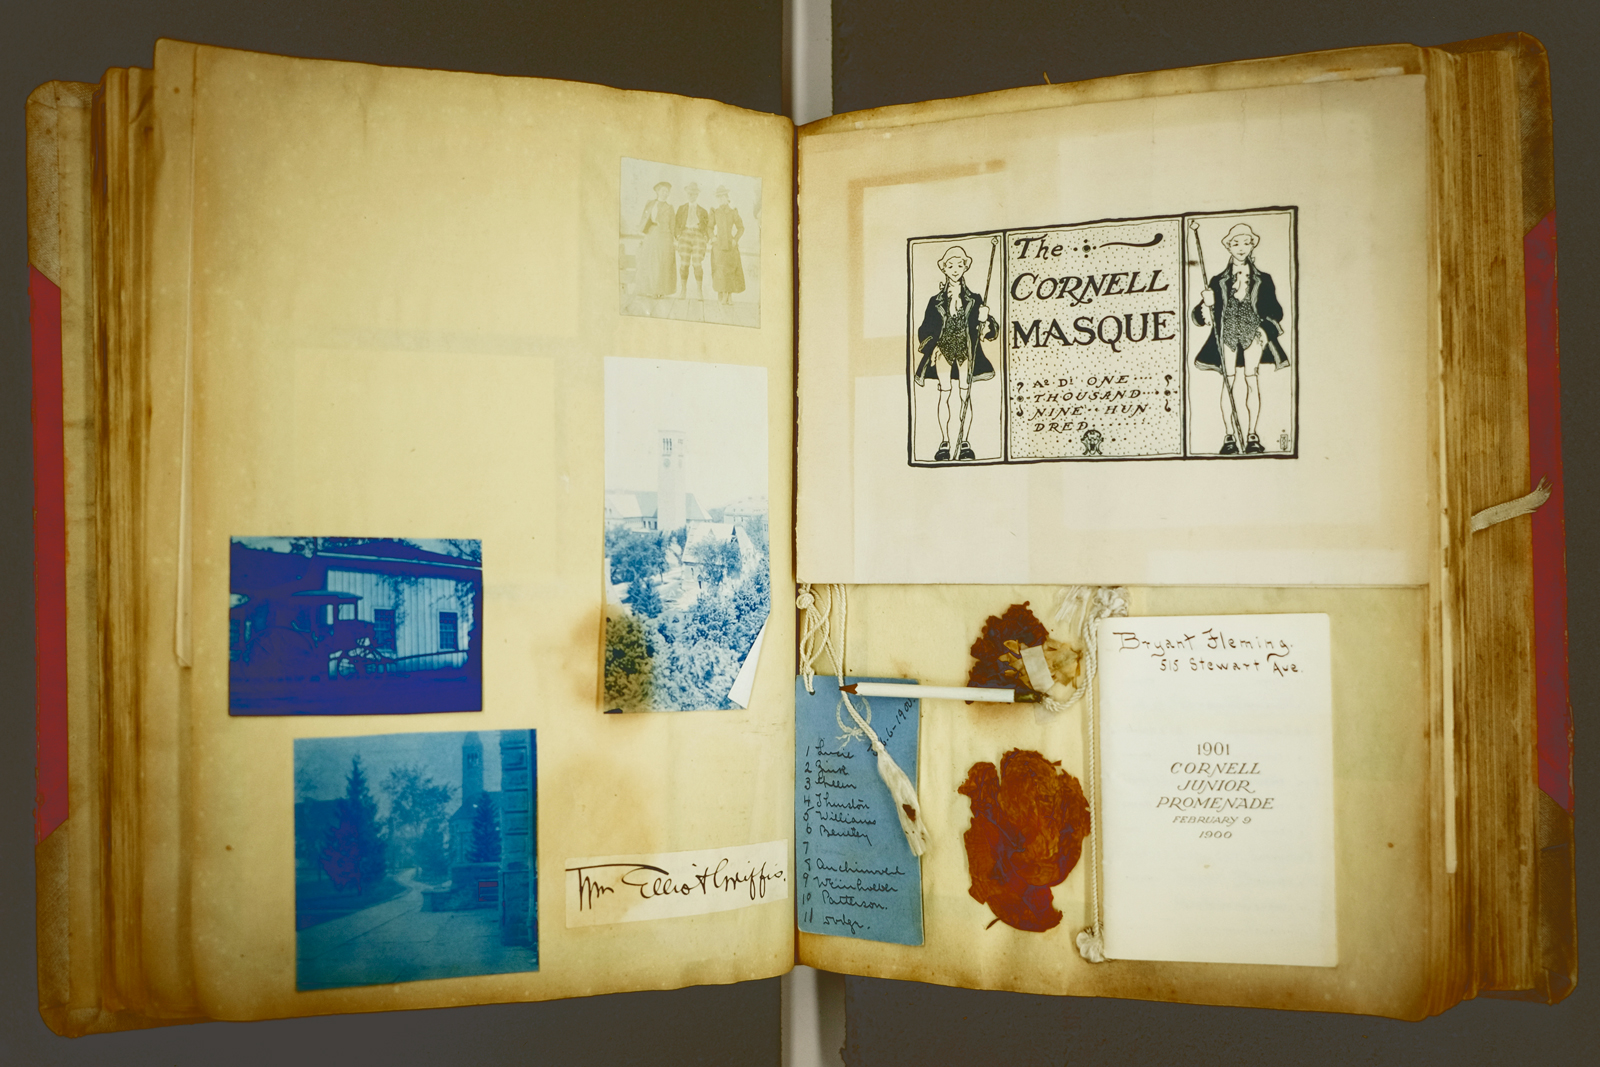 Photos, flowers, a dance card, and a Cornell Masque program decorate this 1901 spread